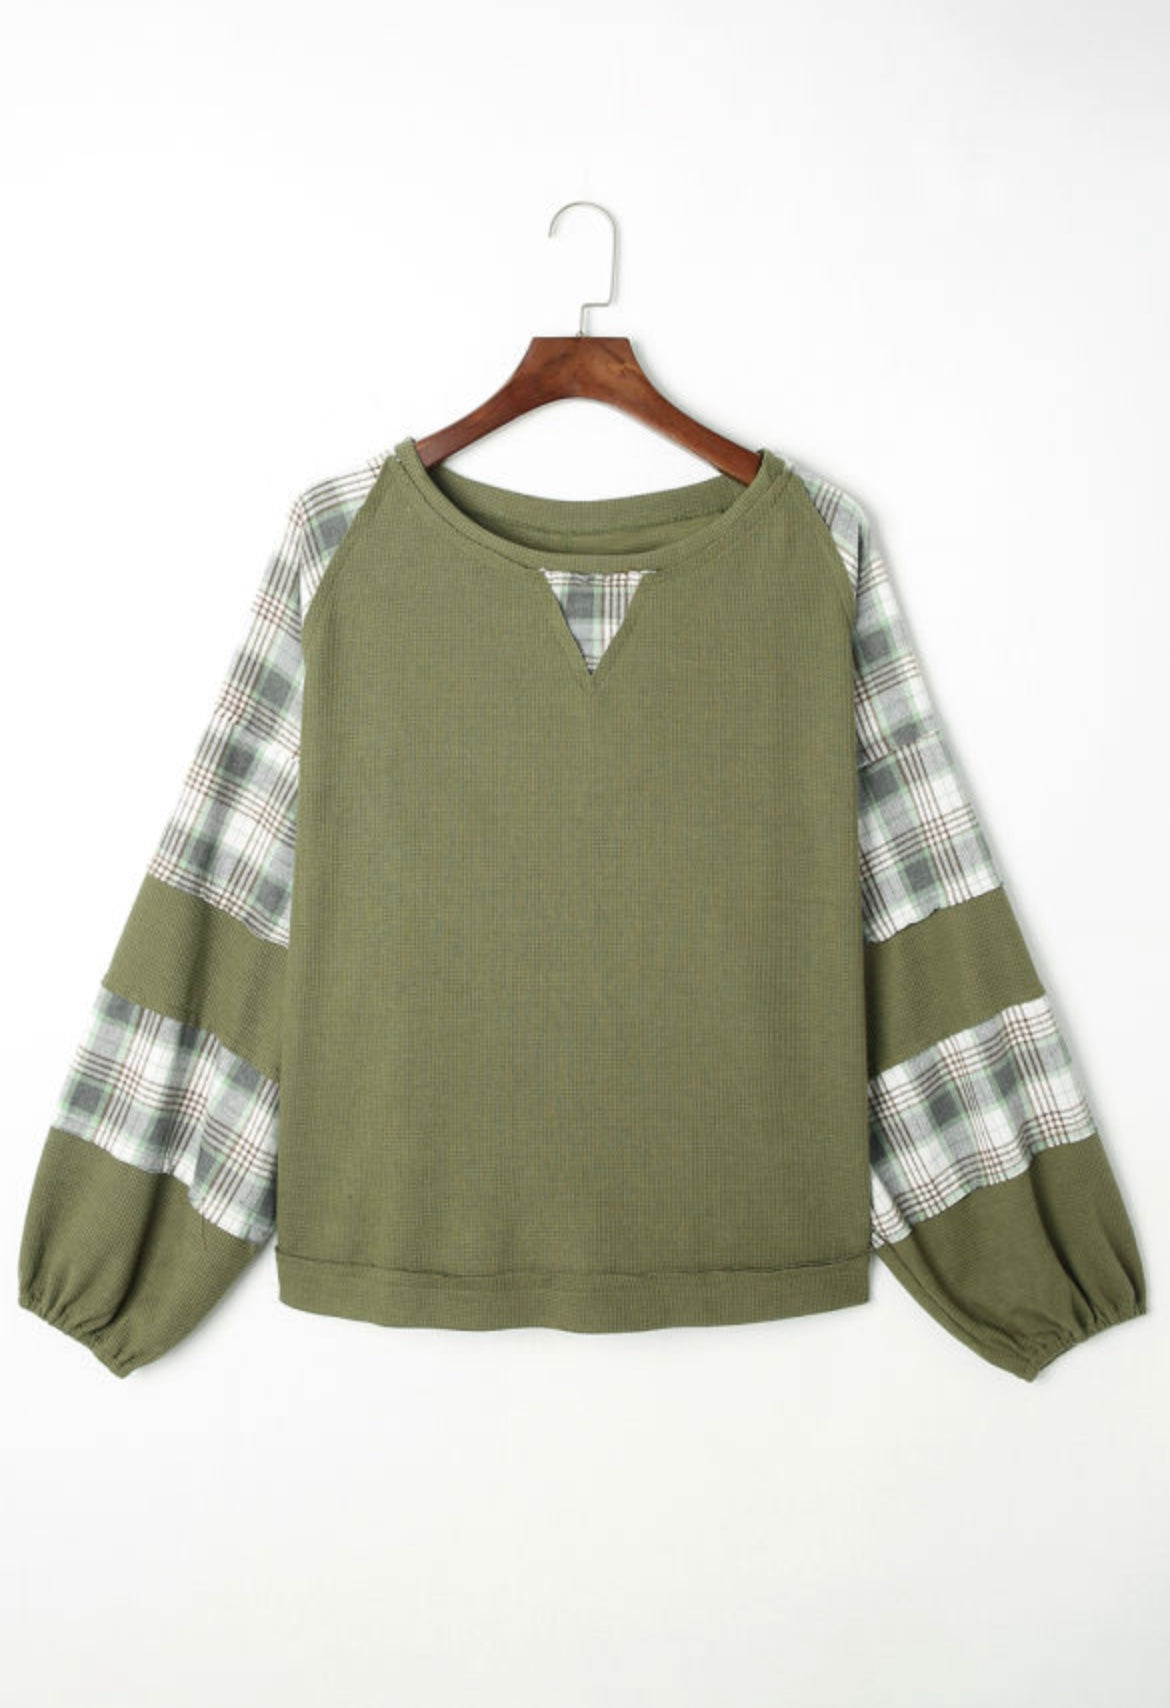 Green Plaid Top was $35